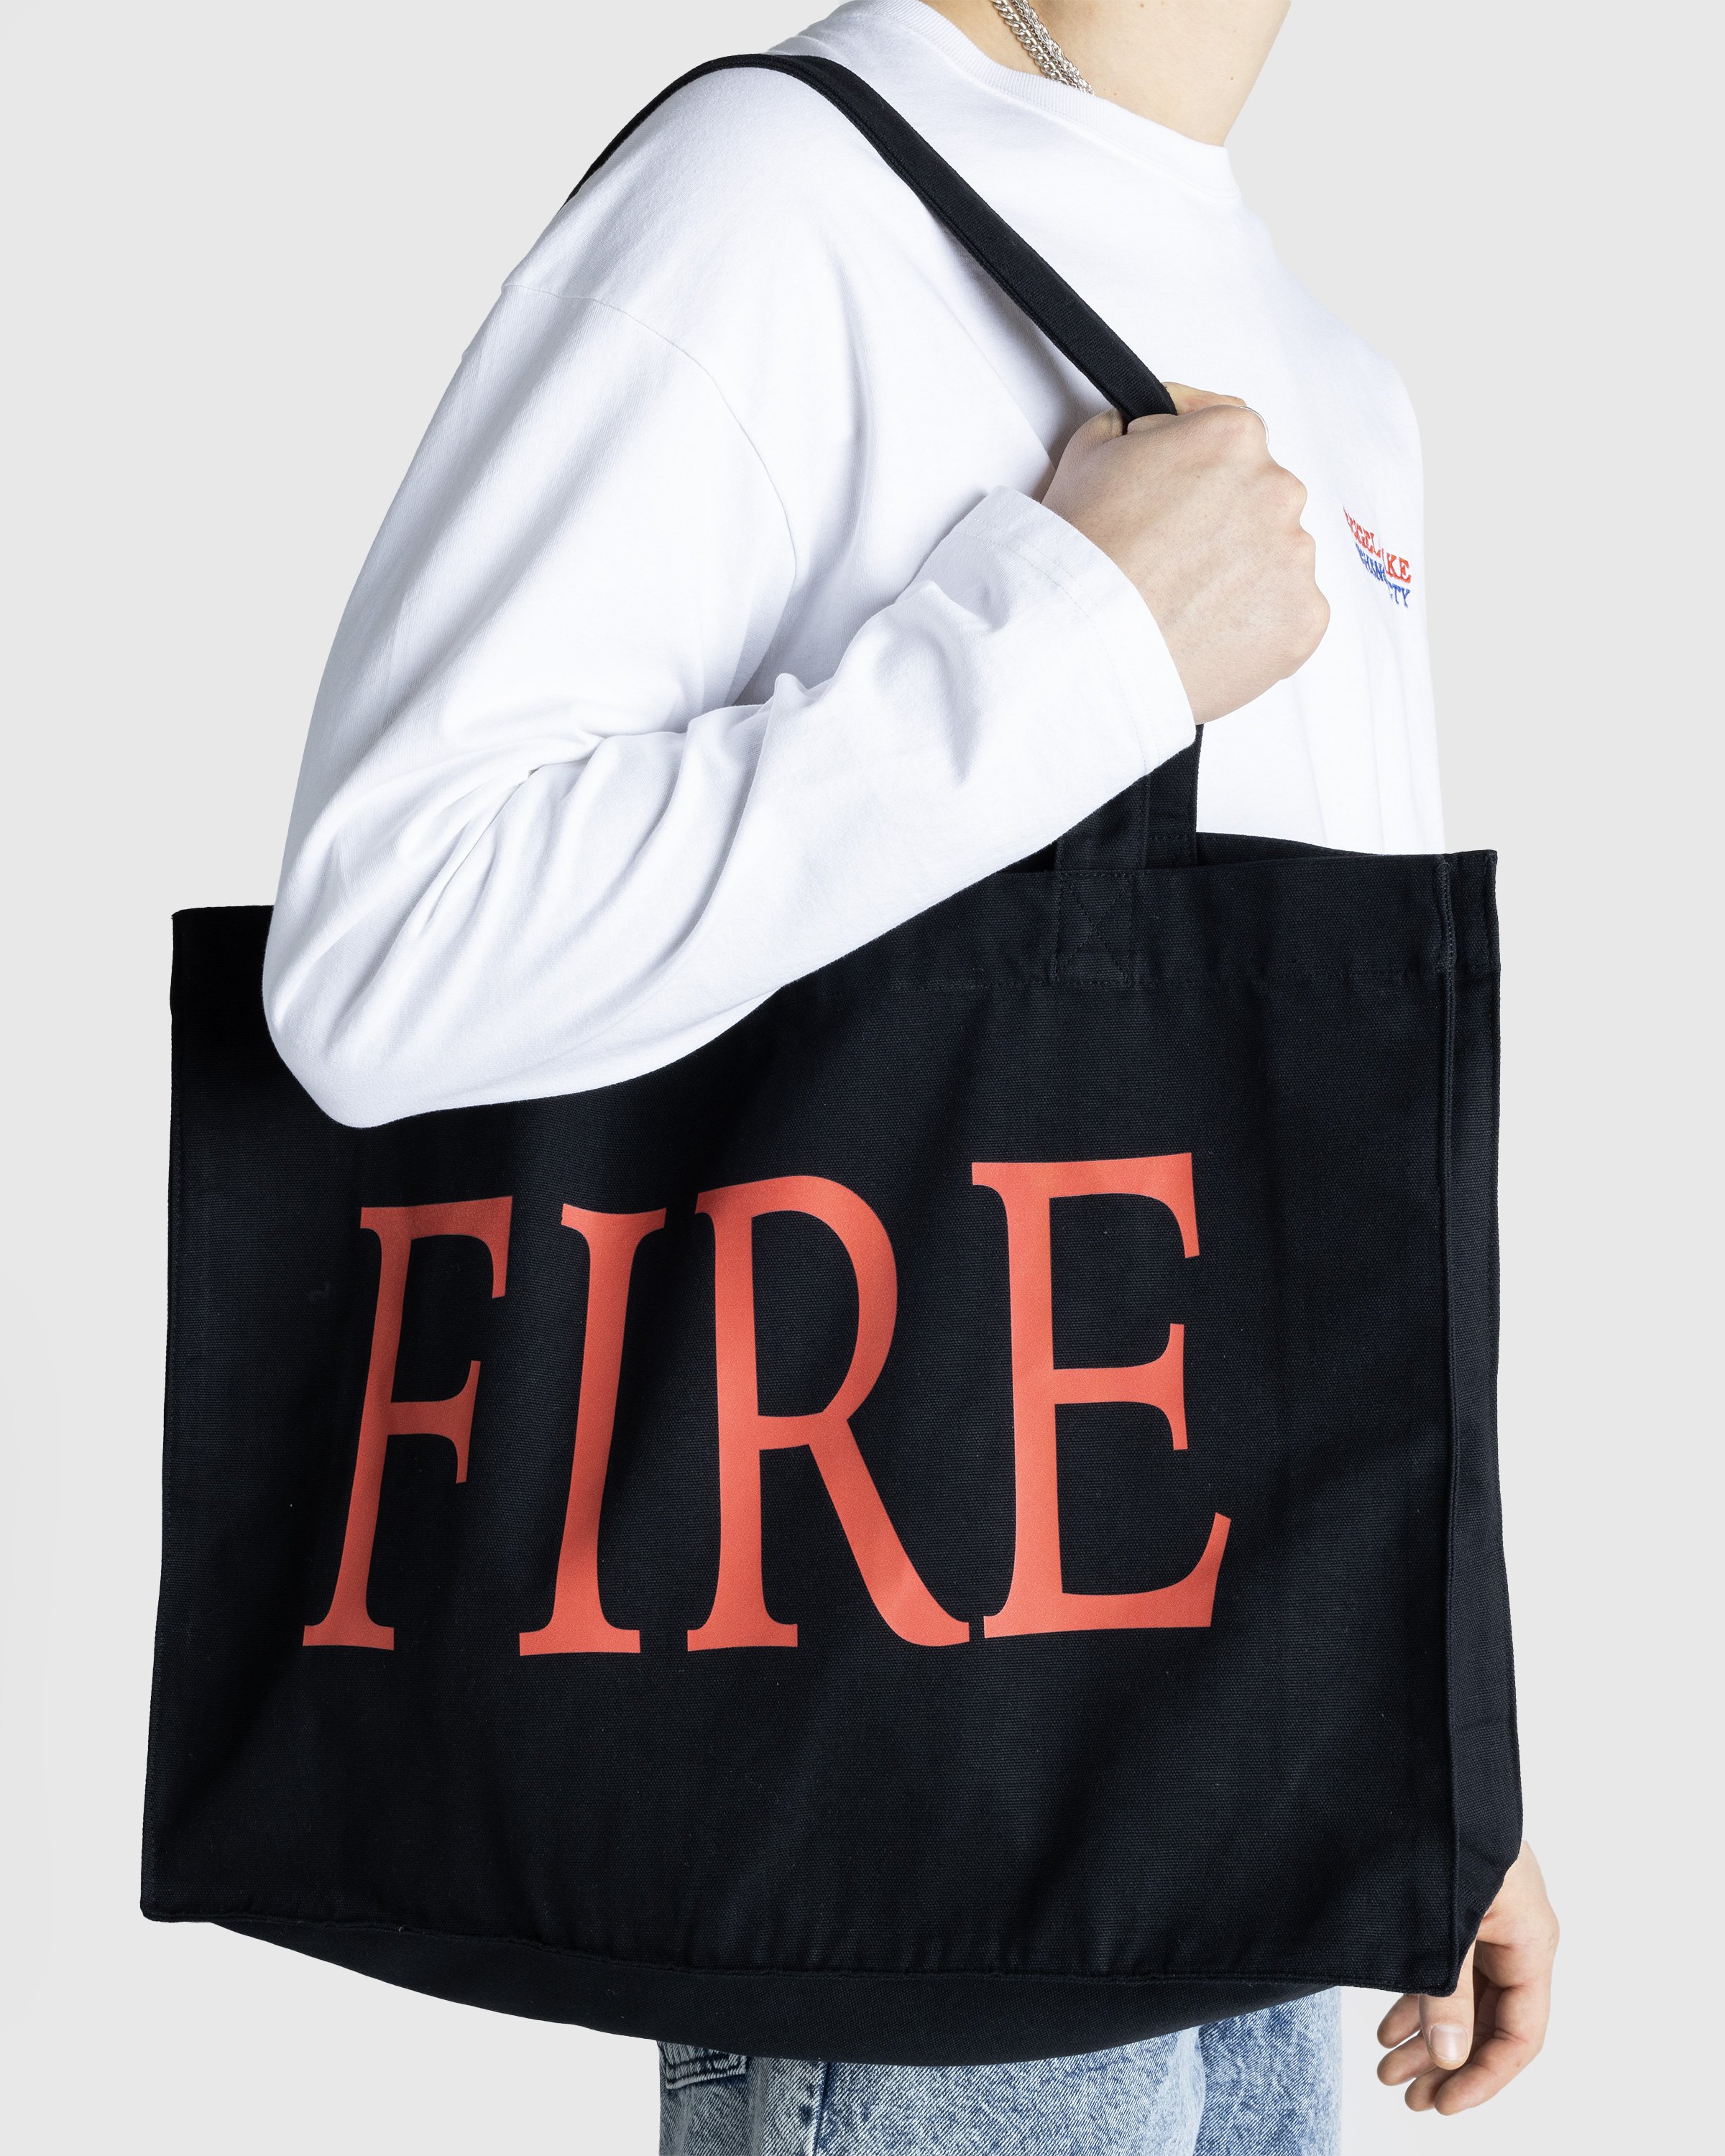 Chiltern Firehouse x Highsnobiety - Tote Bag - Accessories - Black - Image 3